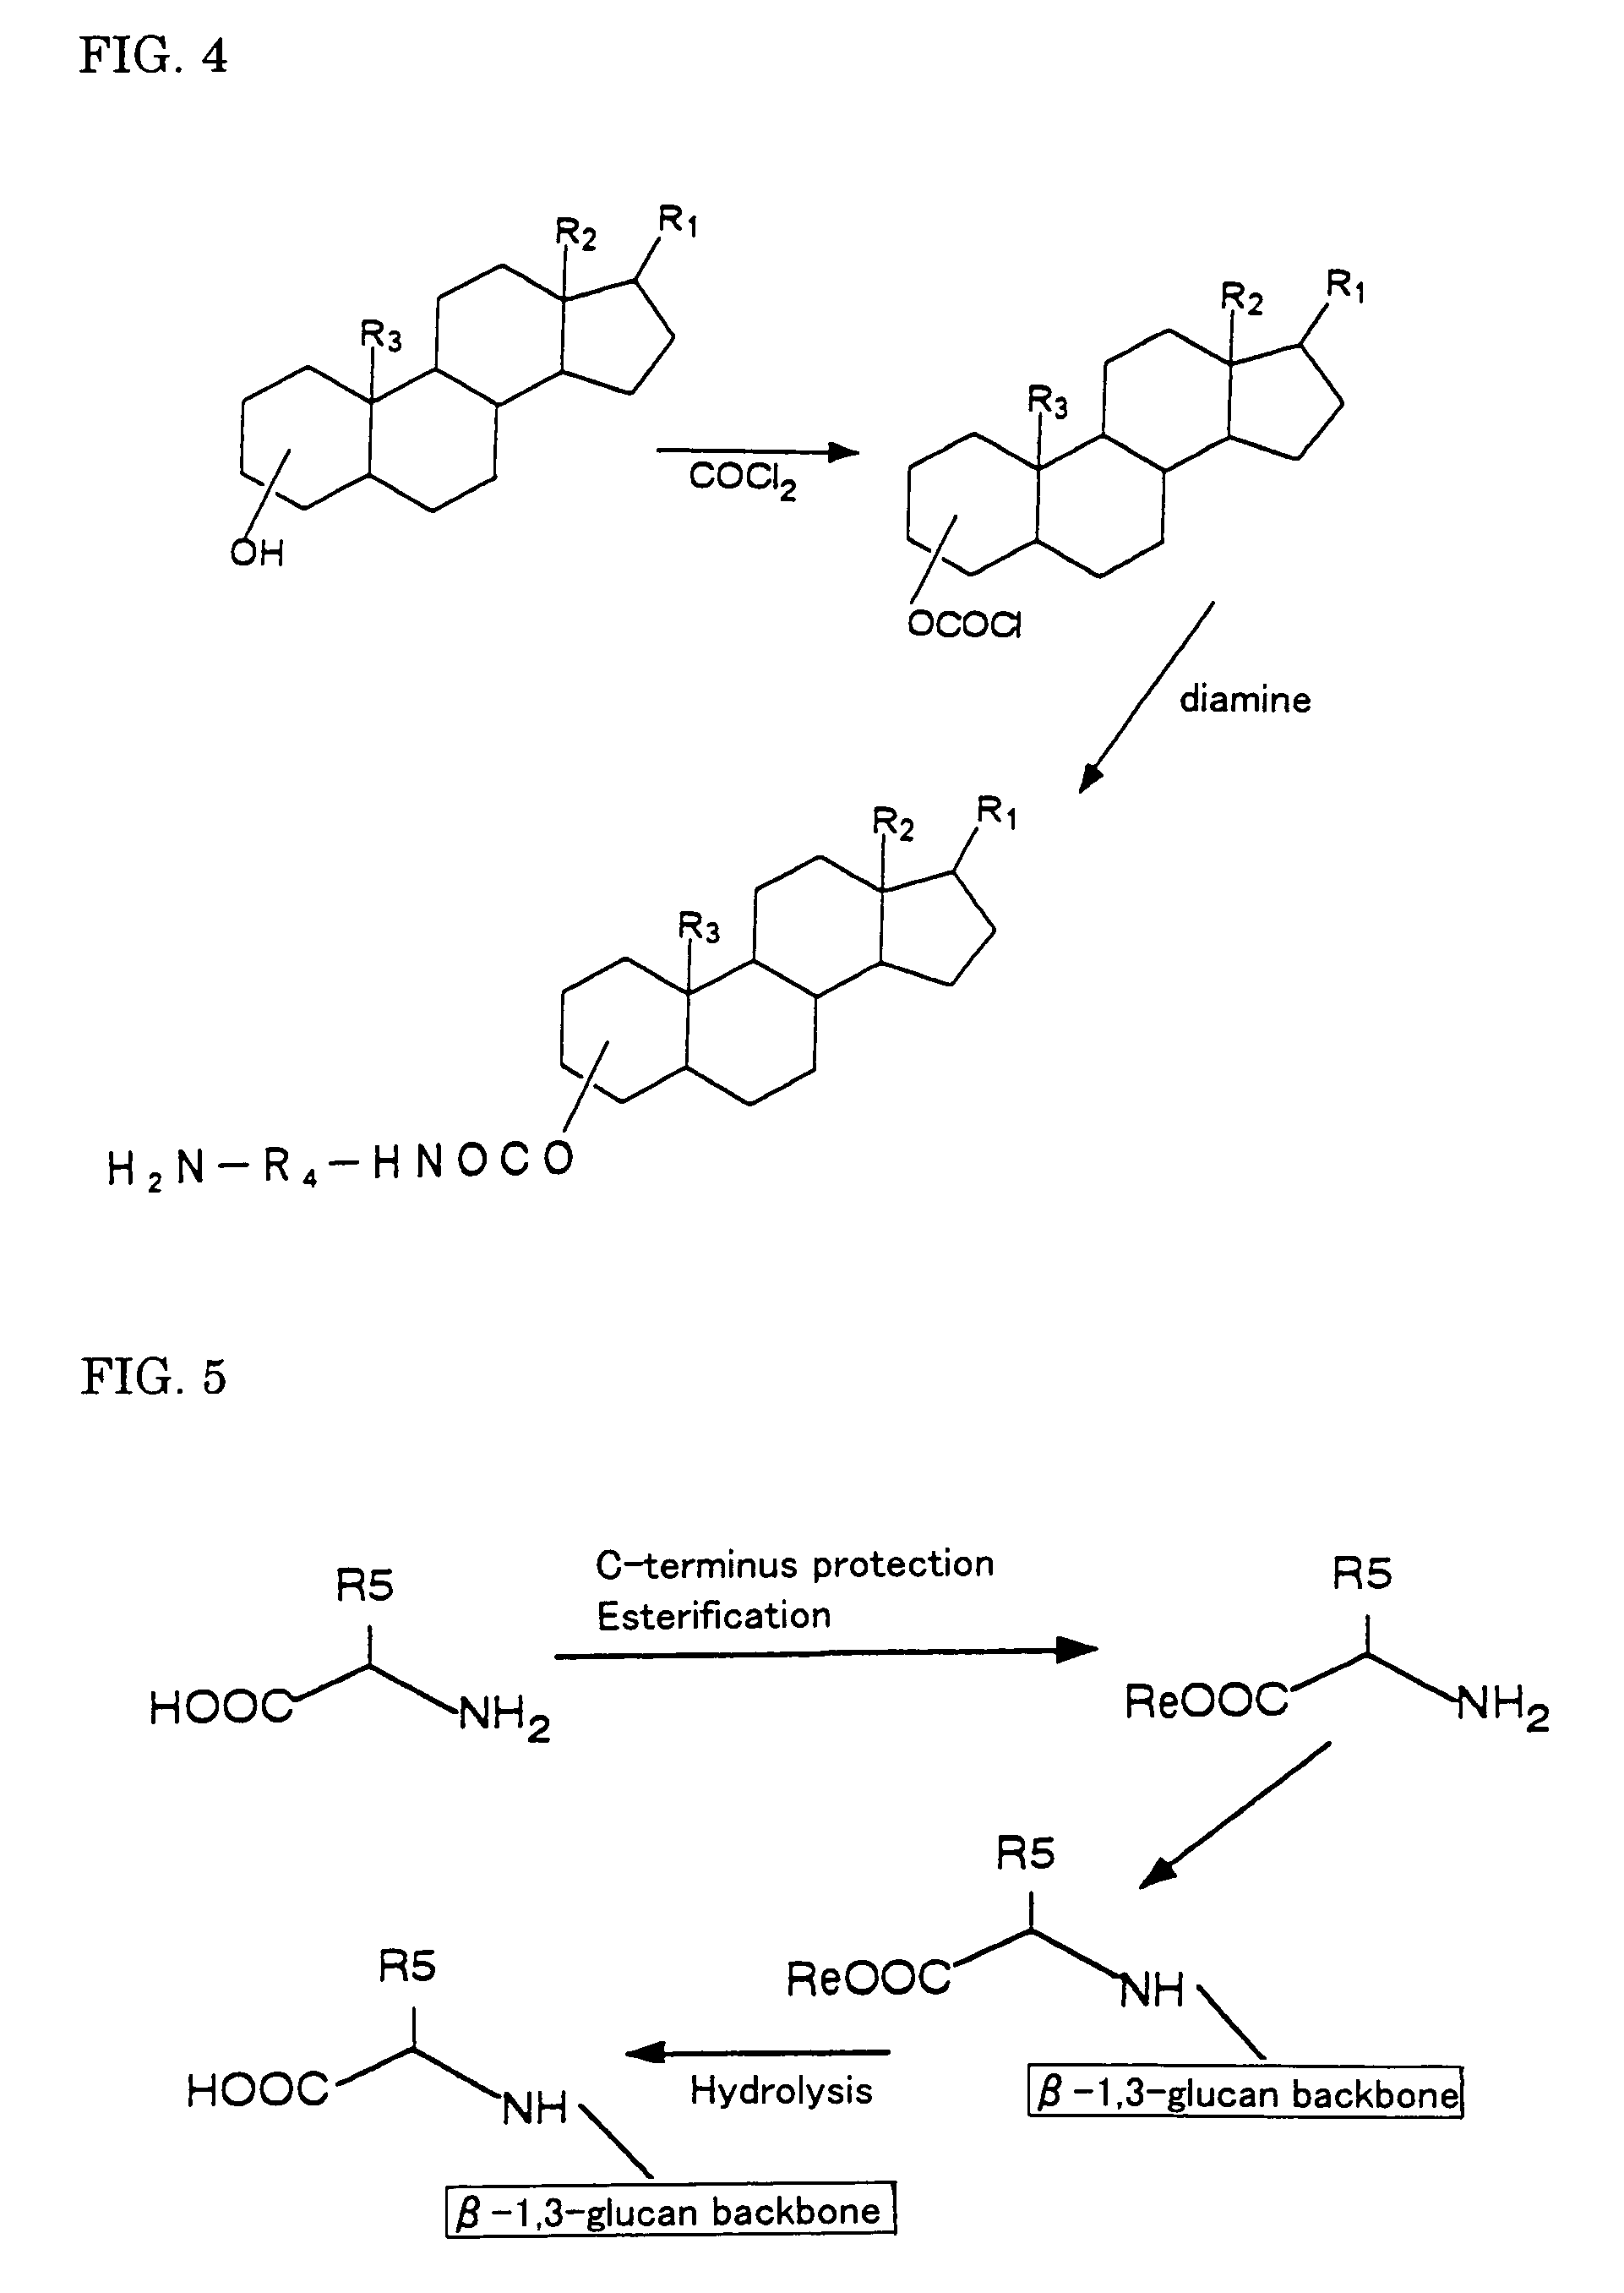 Gene carriers with the use of polysaccharide and process for producing the same